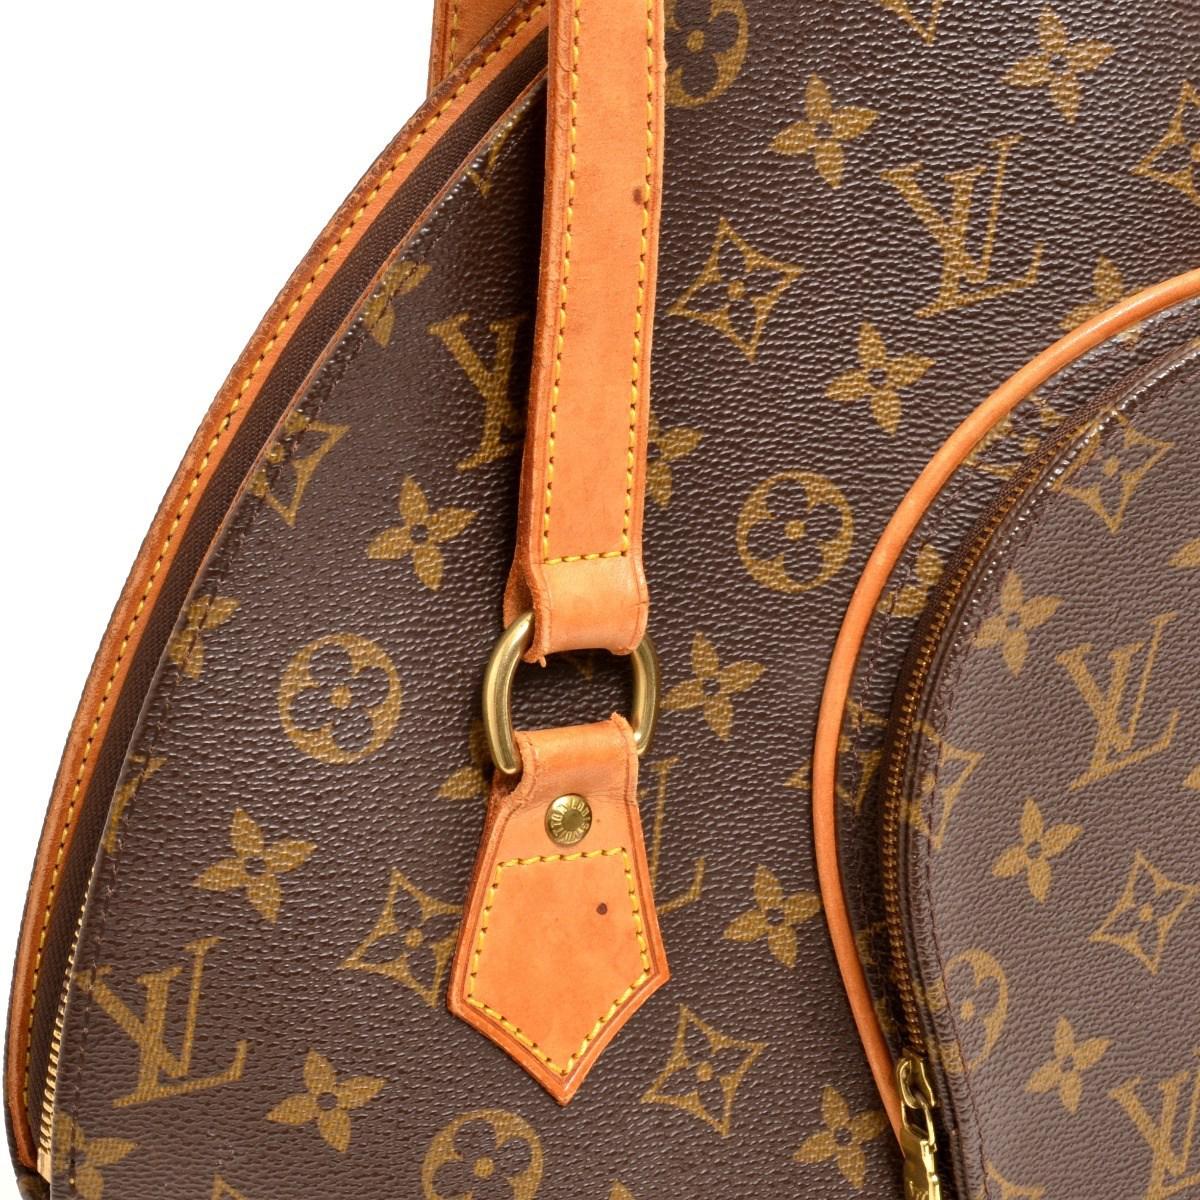 Louis Vuitton Monogram Canvas Ellips Shopping Discontinued Items Shoulder Bag M51128 in Brown - Lyst